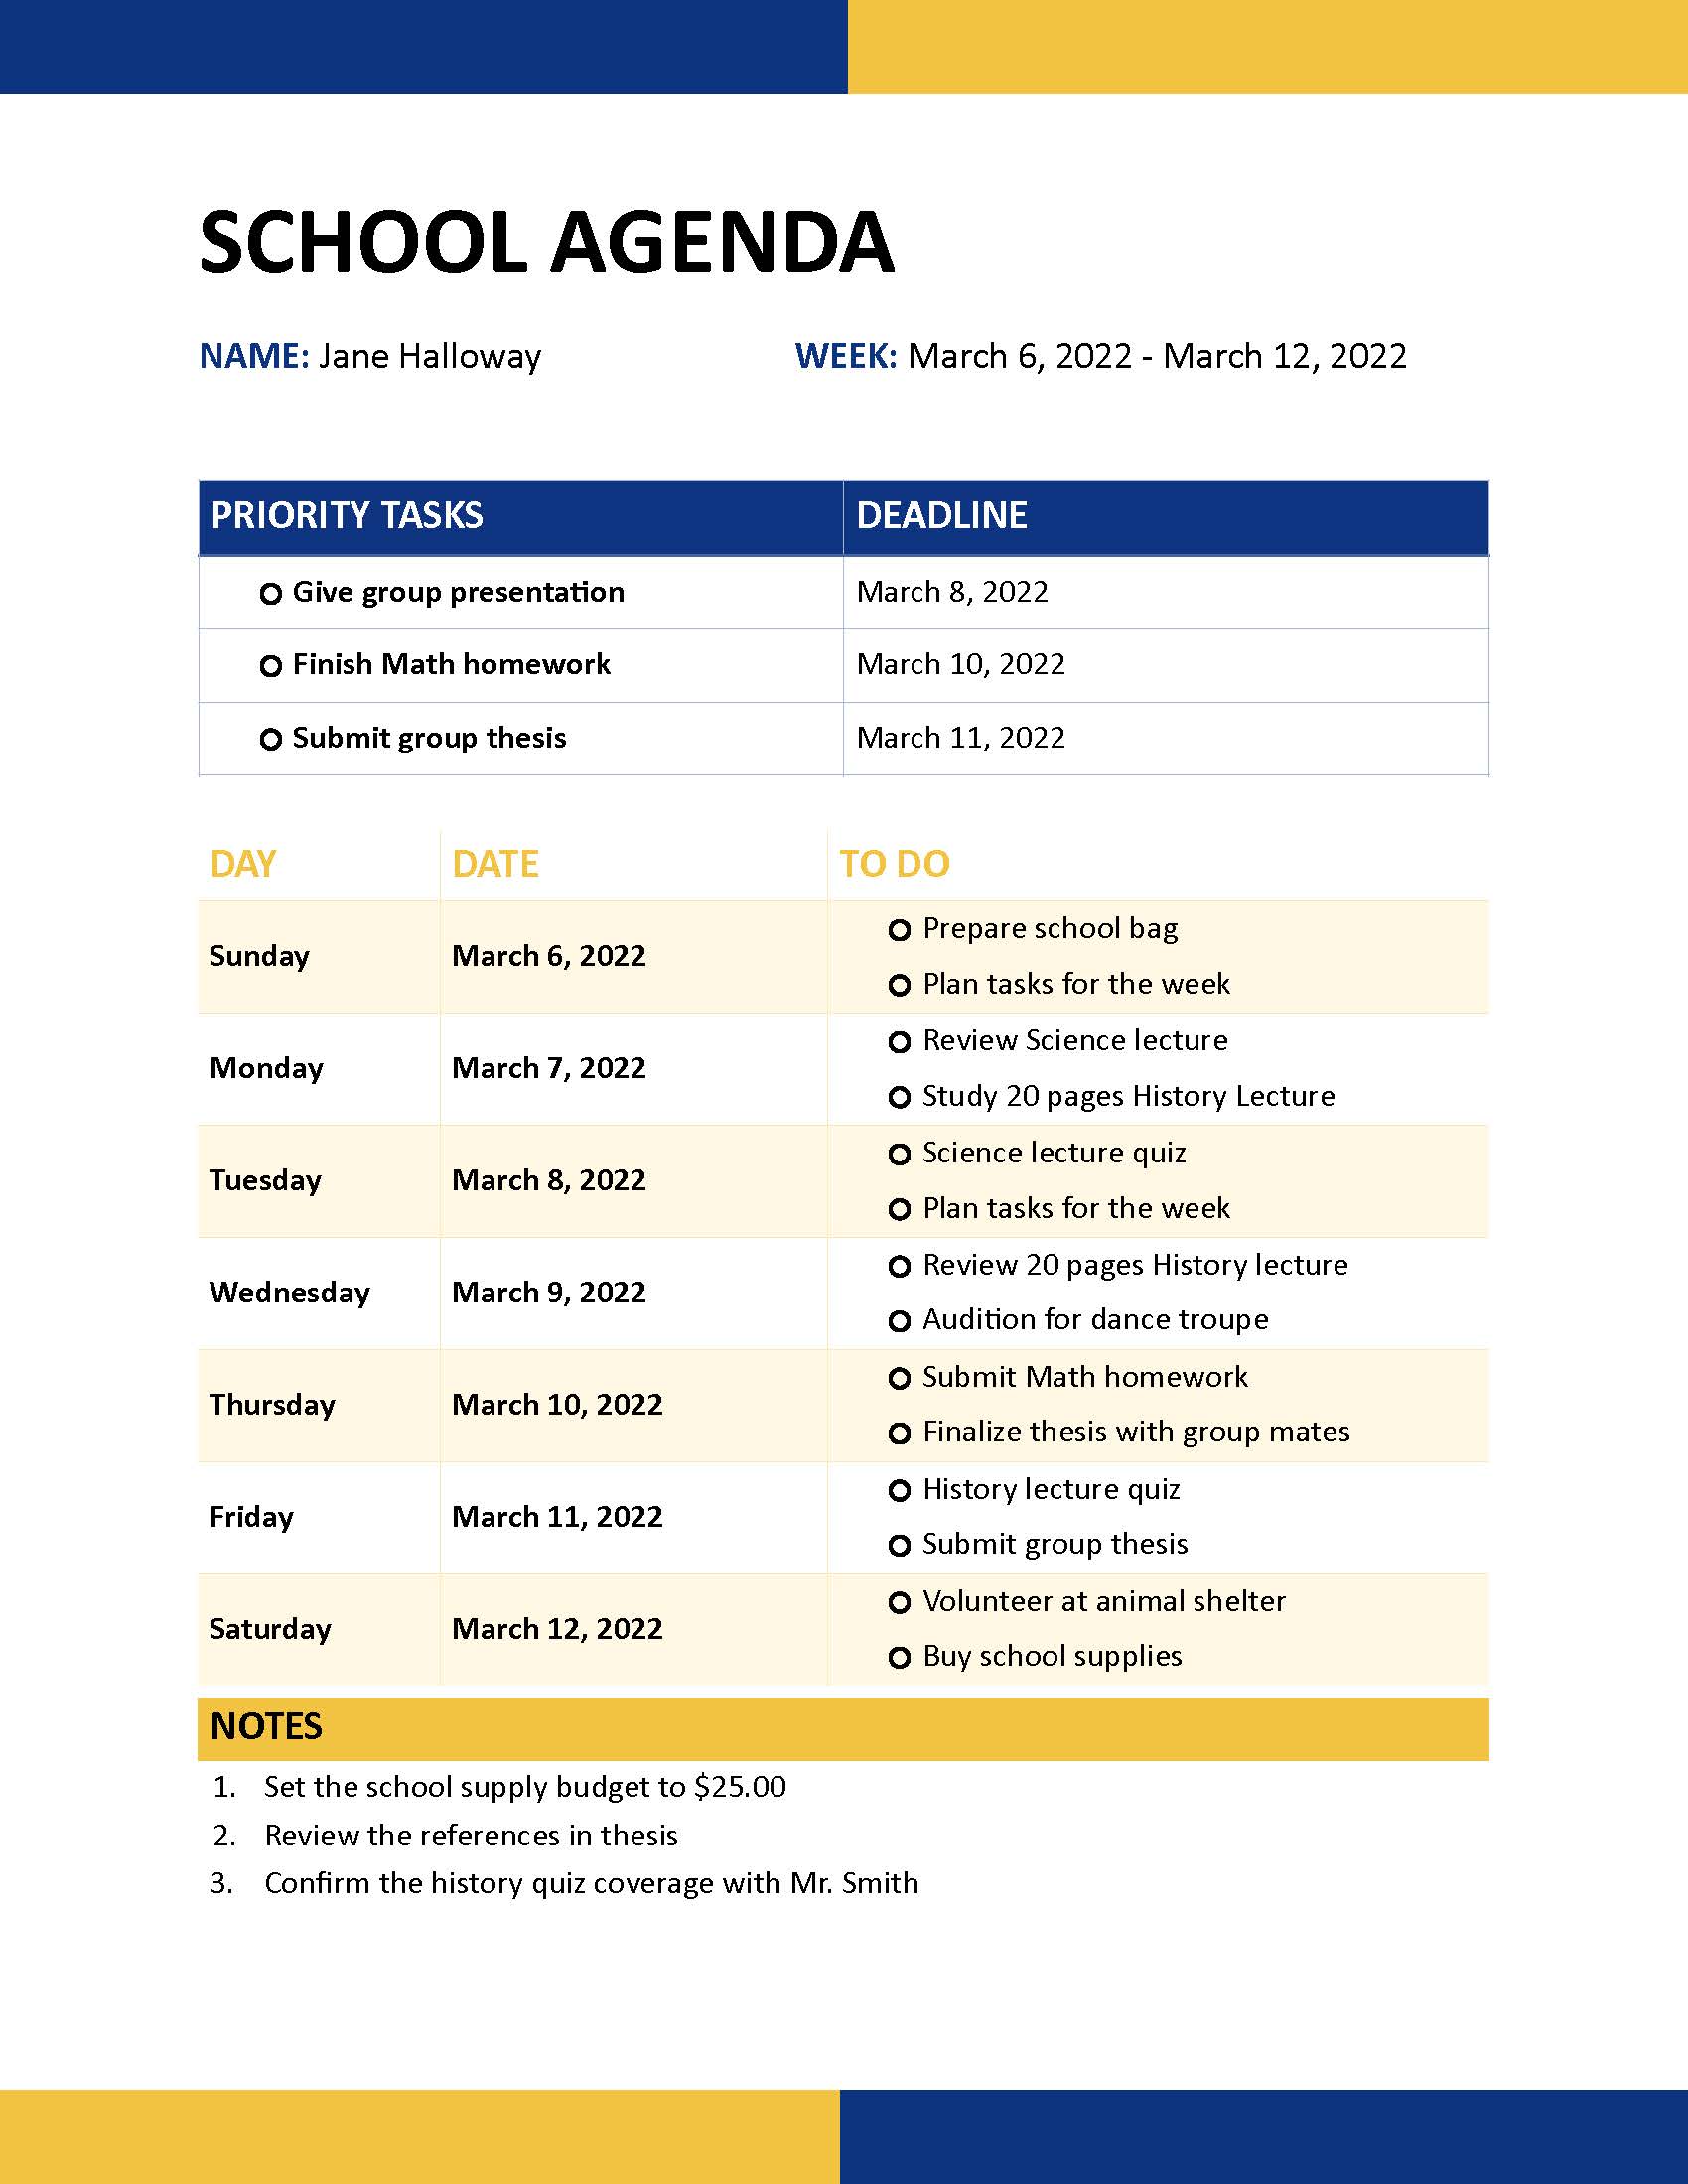 School Agenda Sample Template in Word, Google Docs, Excel, PDF, Apple Pages